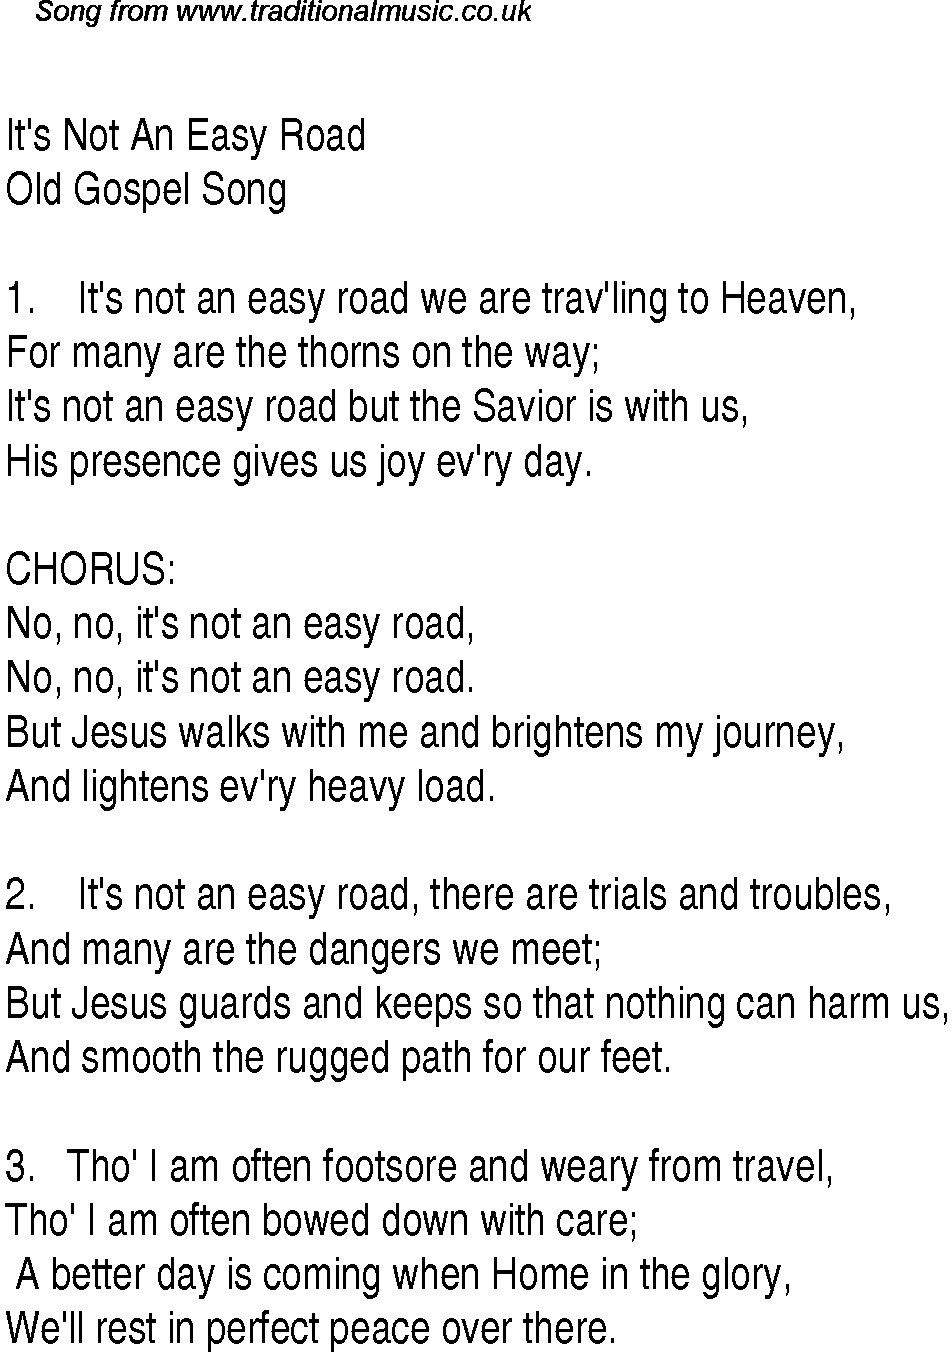 Gospel Song: it's-not-an-easy-road, lyrics and chords.